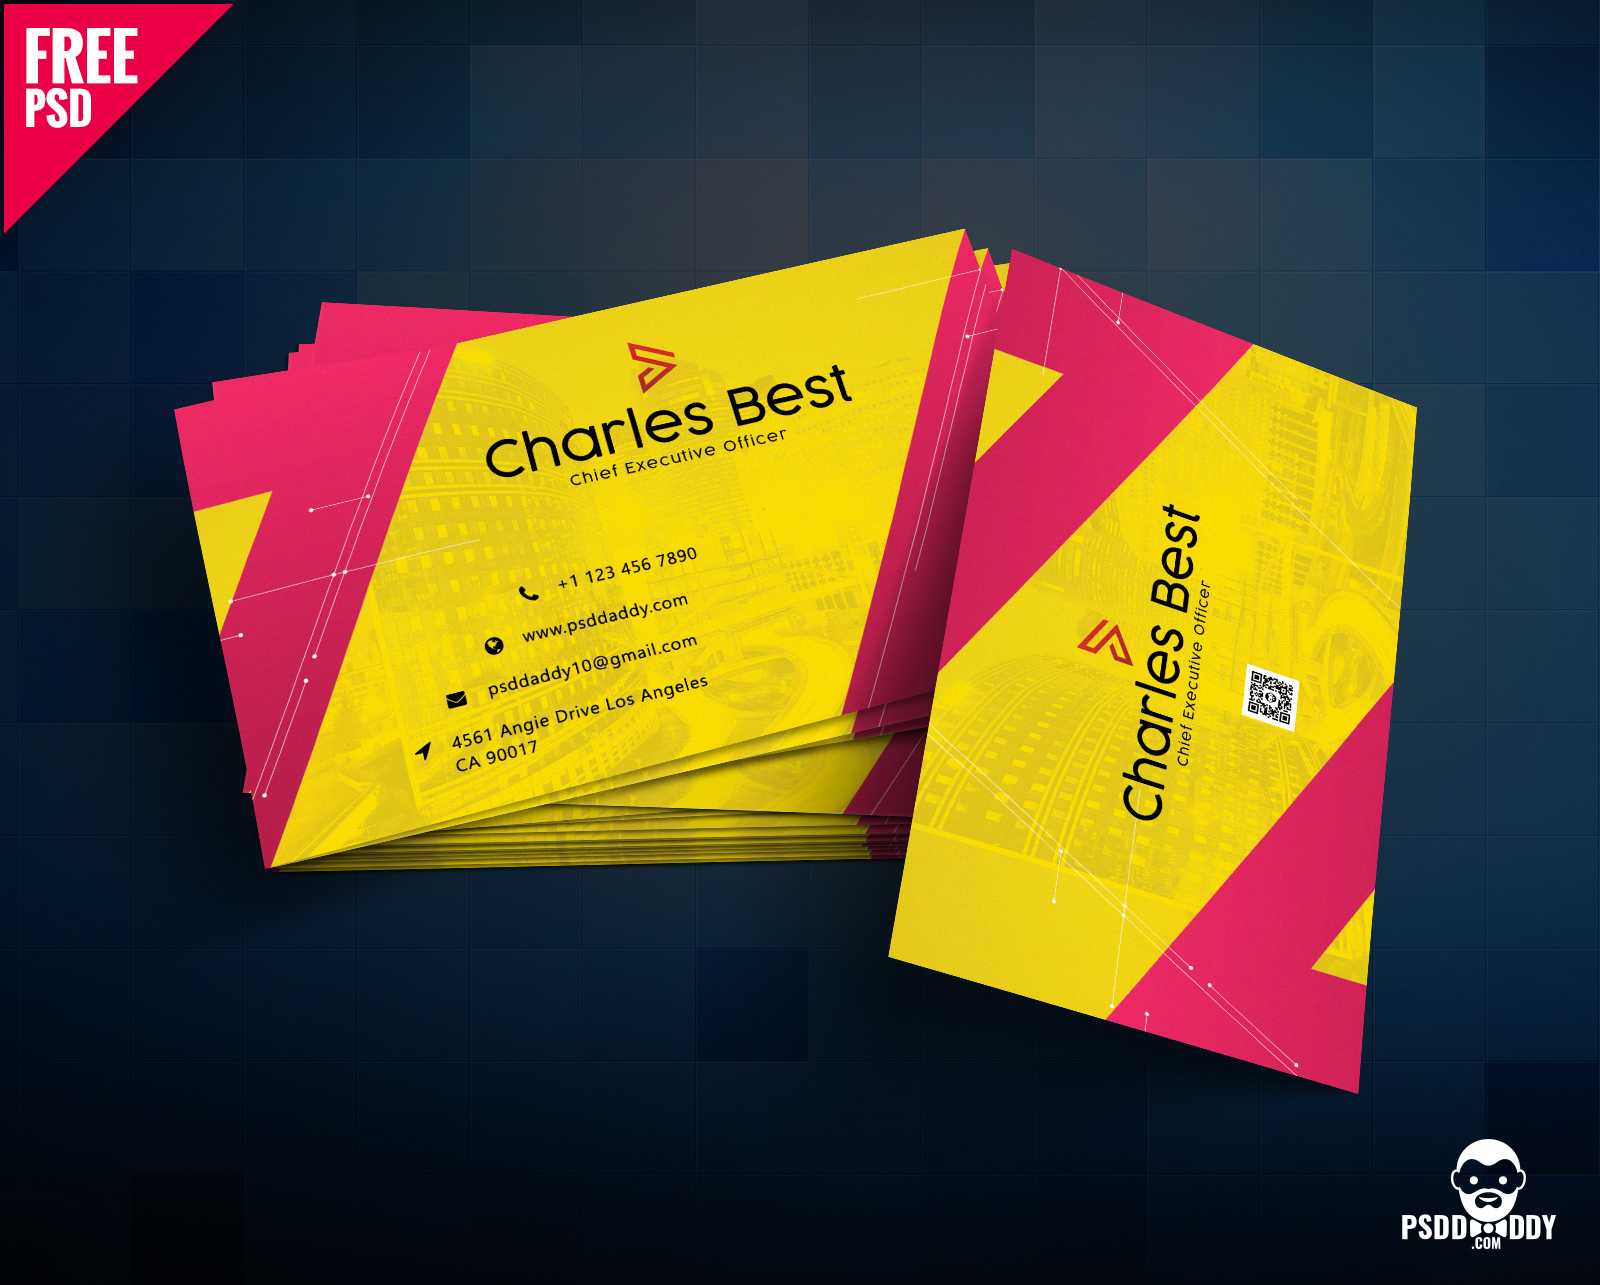 Download] Creative Business Card Free Psd | Psddaddy With Business Card Size Psd Template